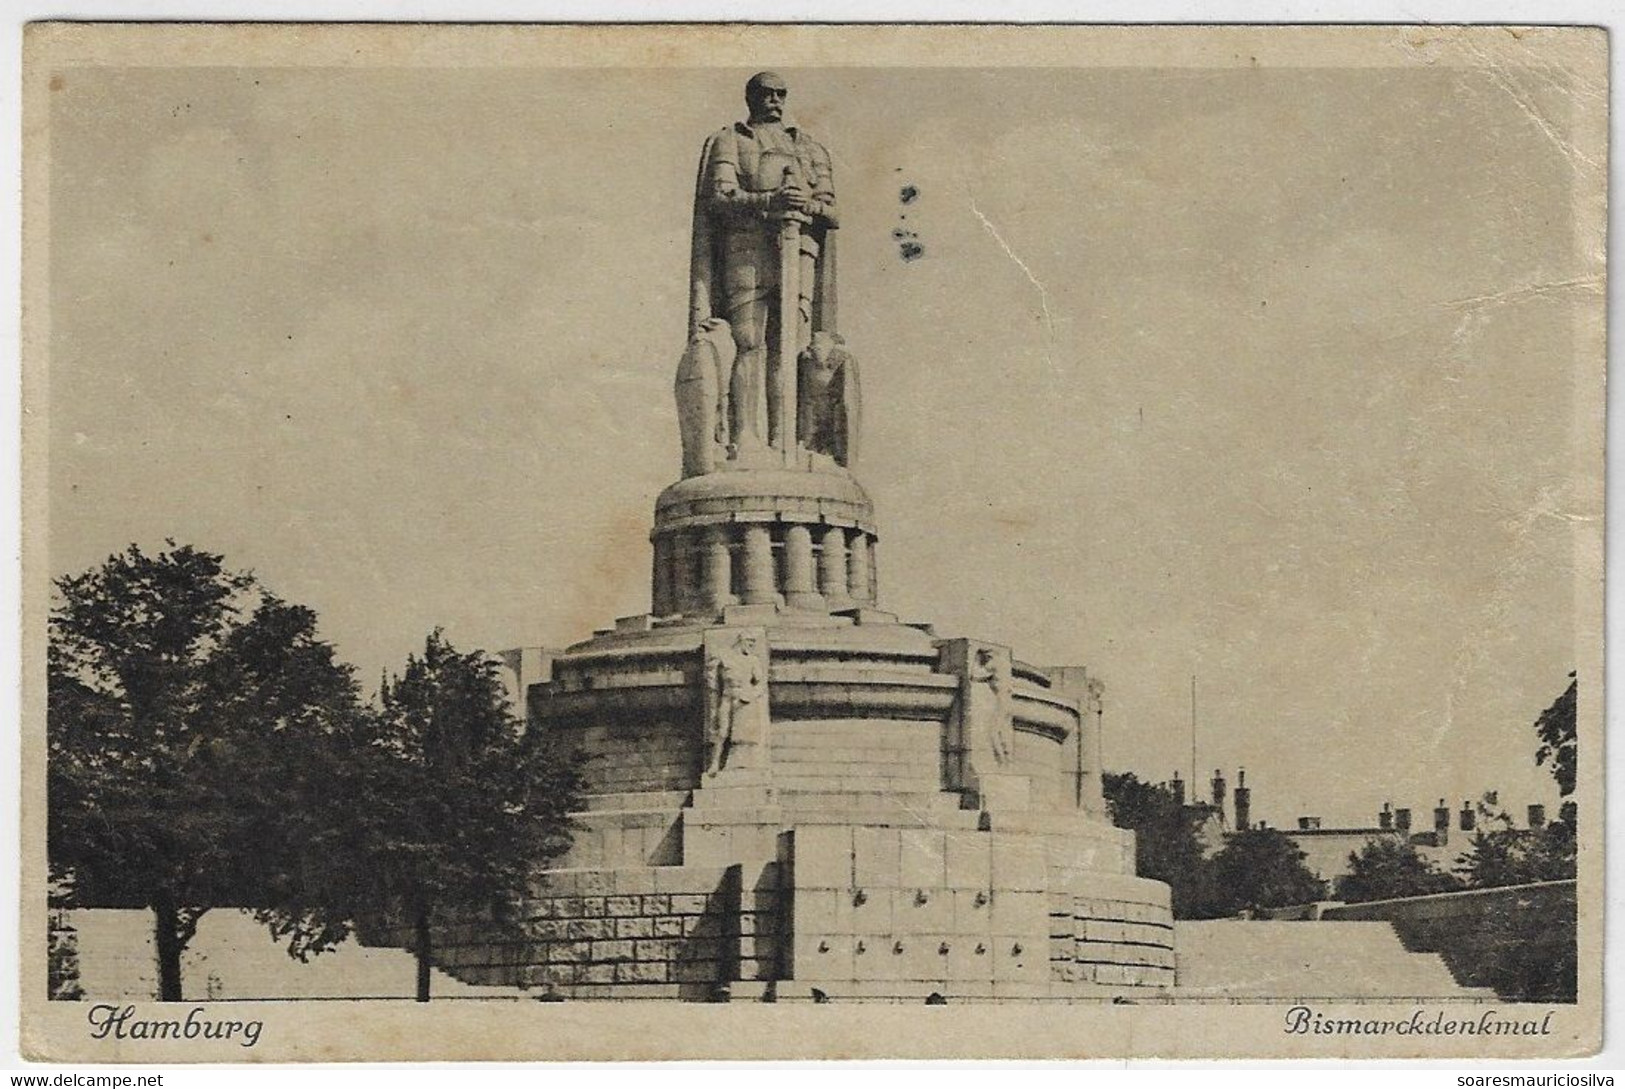 Germany 1928 Postcard Bismarck Monument Hamburg Stamp 15 Pfennig Cancel Wiesbaden The Spa For Autumn And Winter Cures - Thermalisme